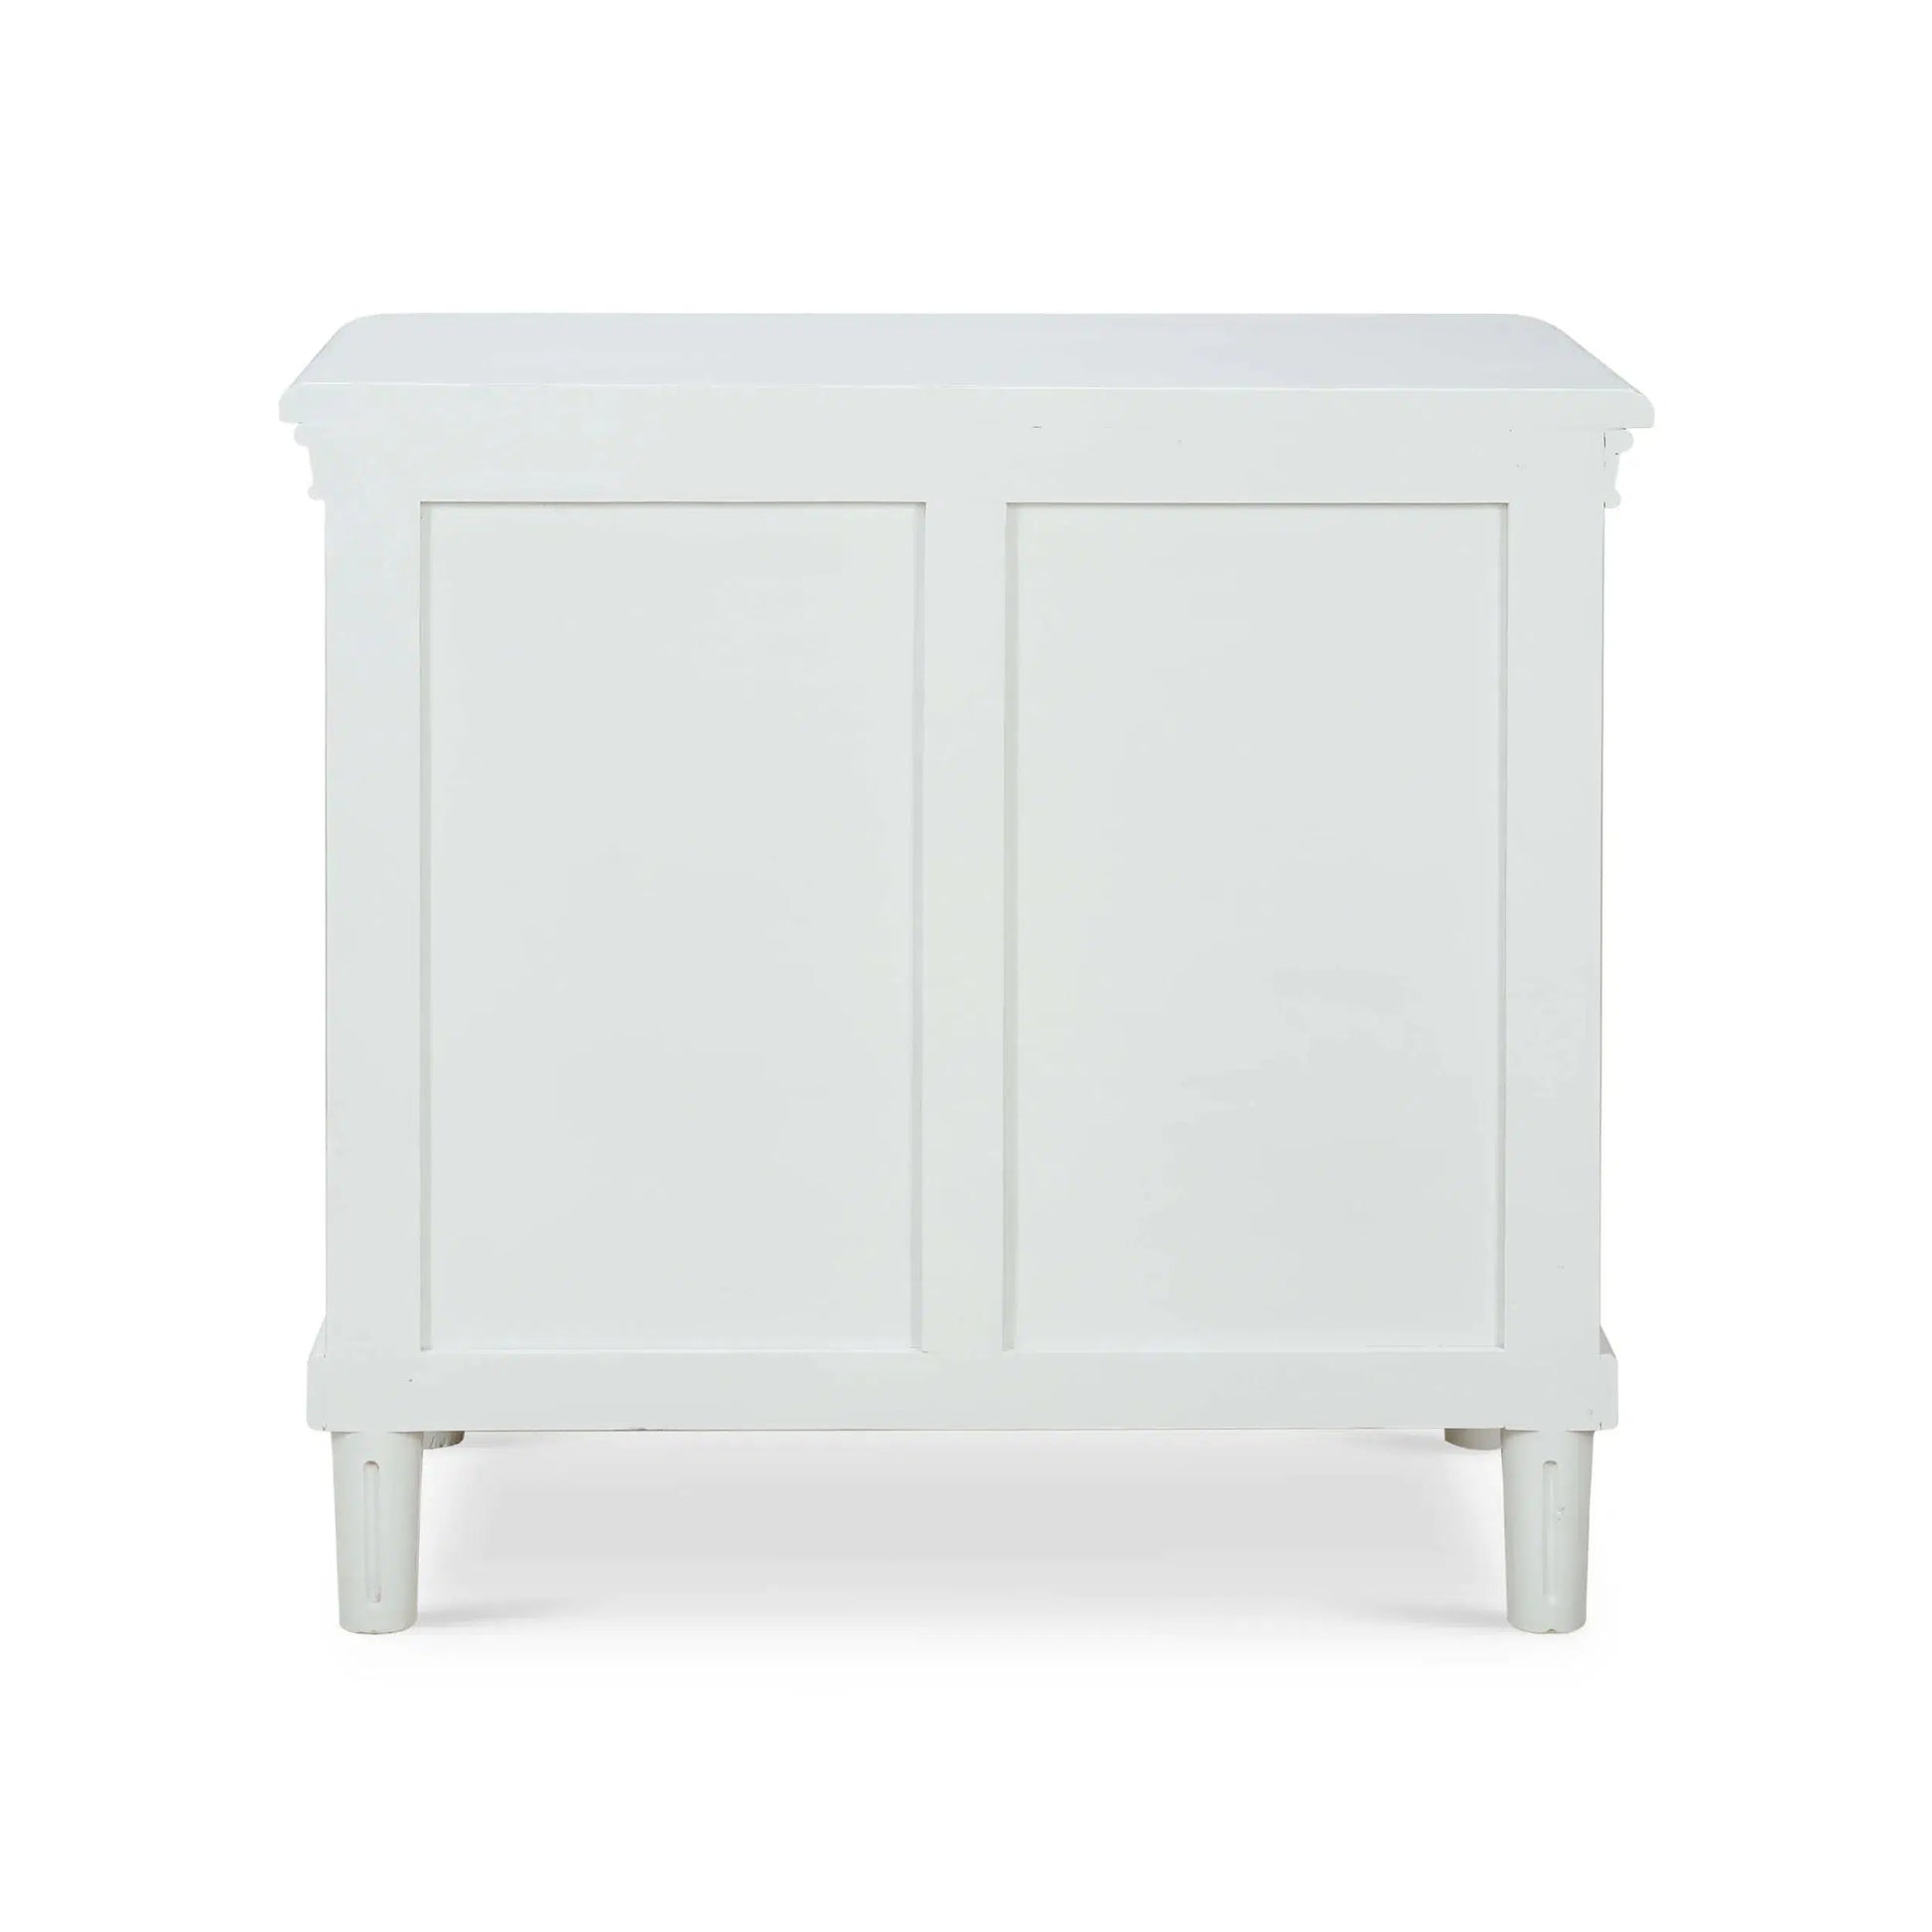 Hayward 3 Drawer Dresser Small In Architectural White-Blue Hand Home